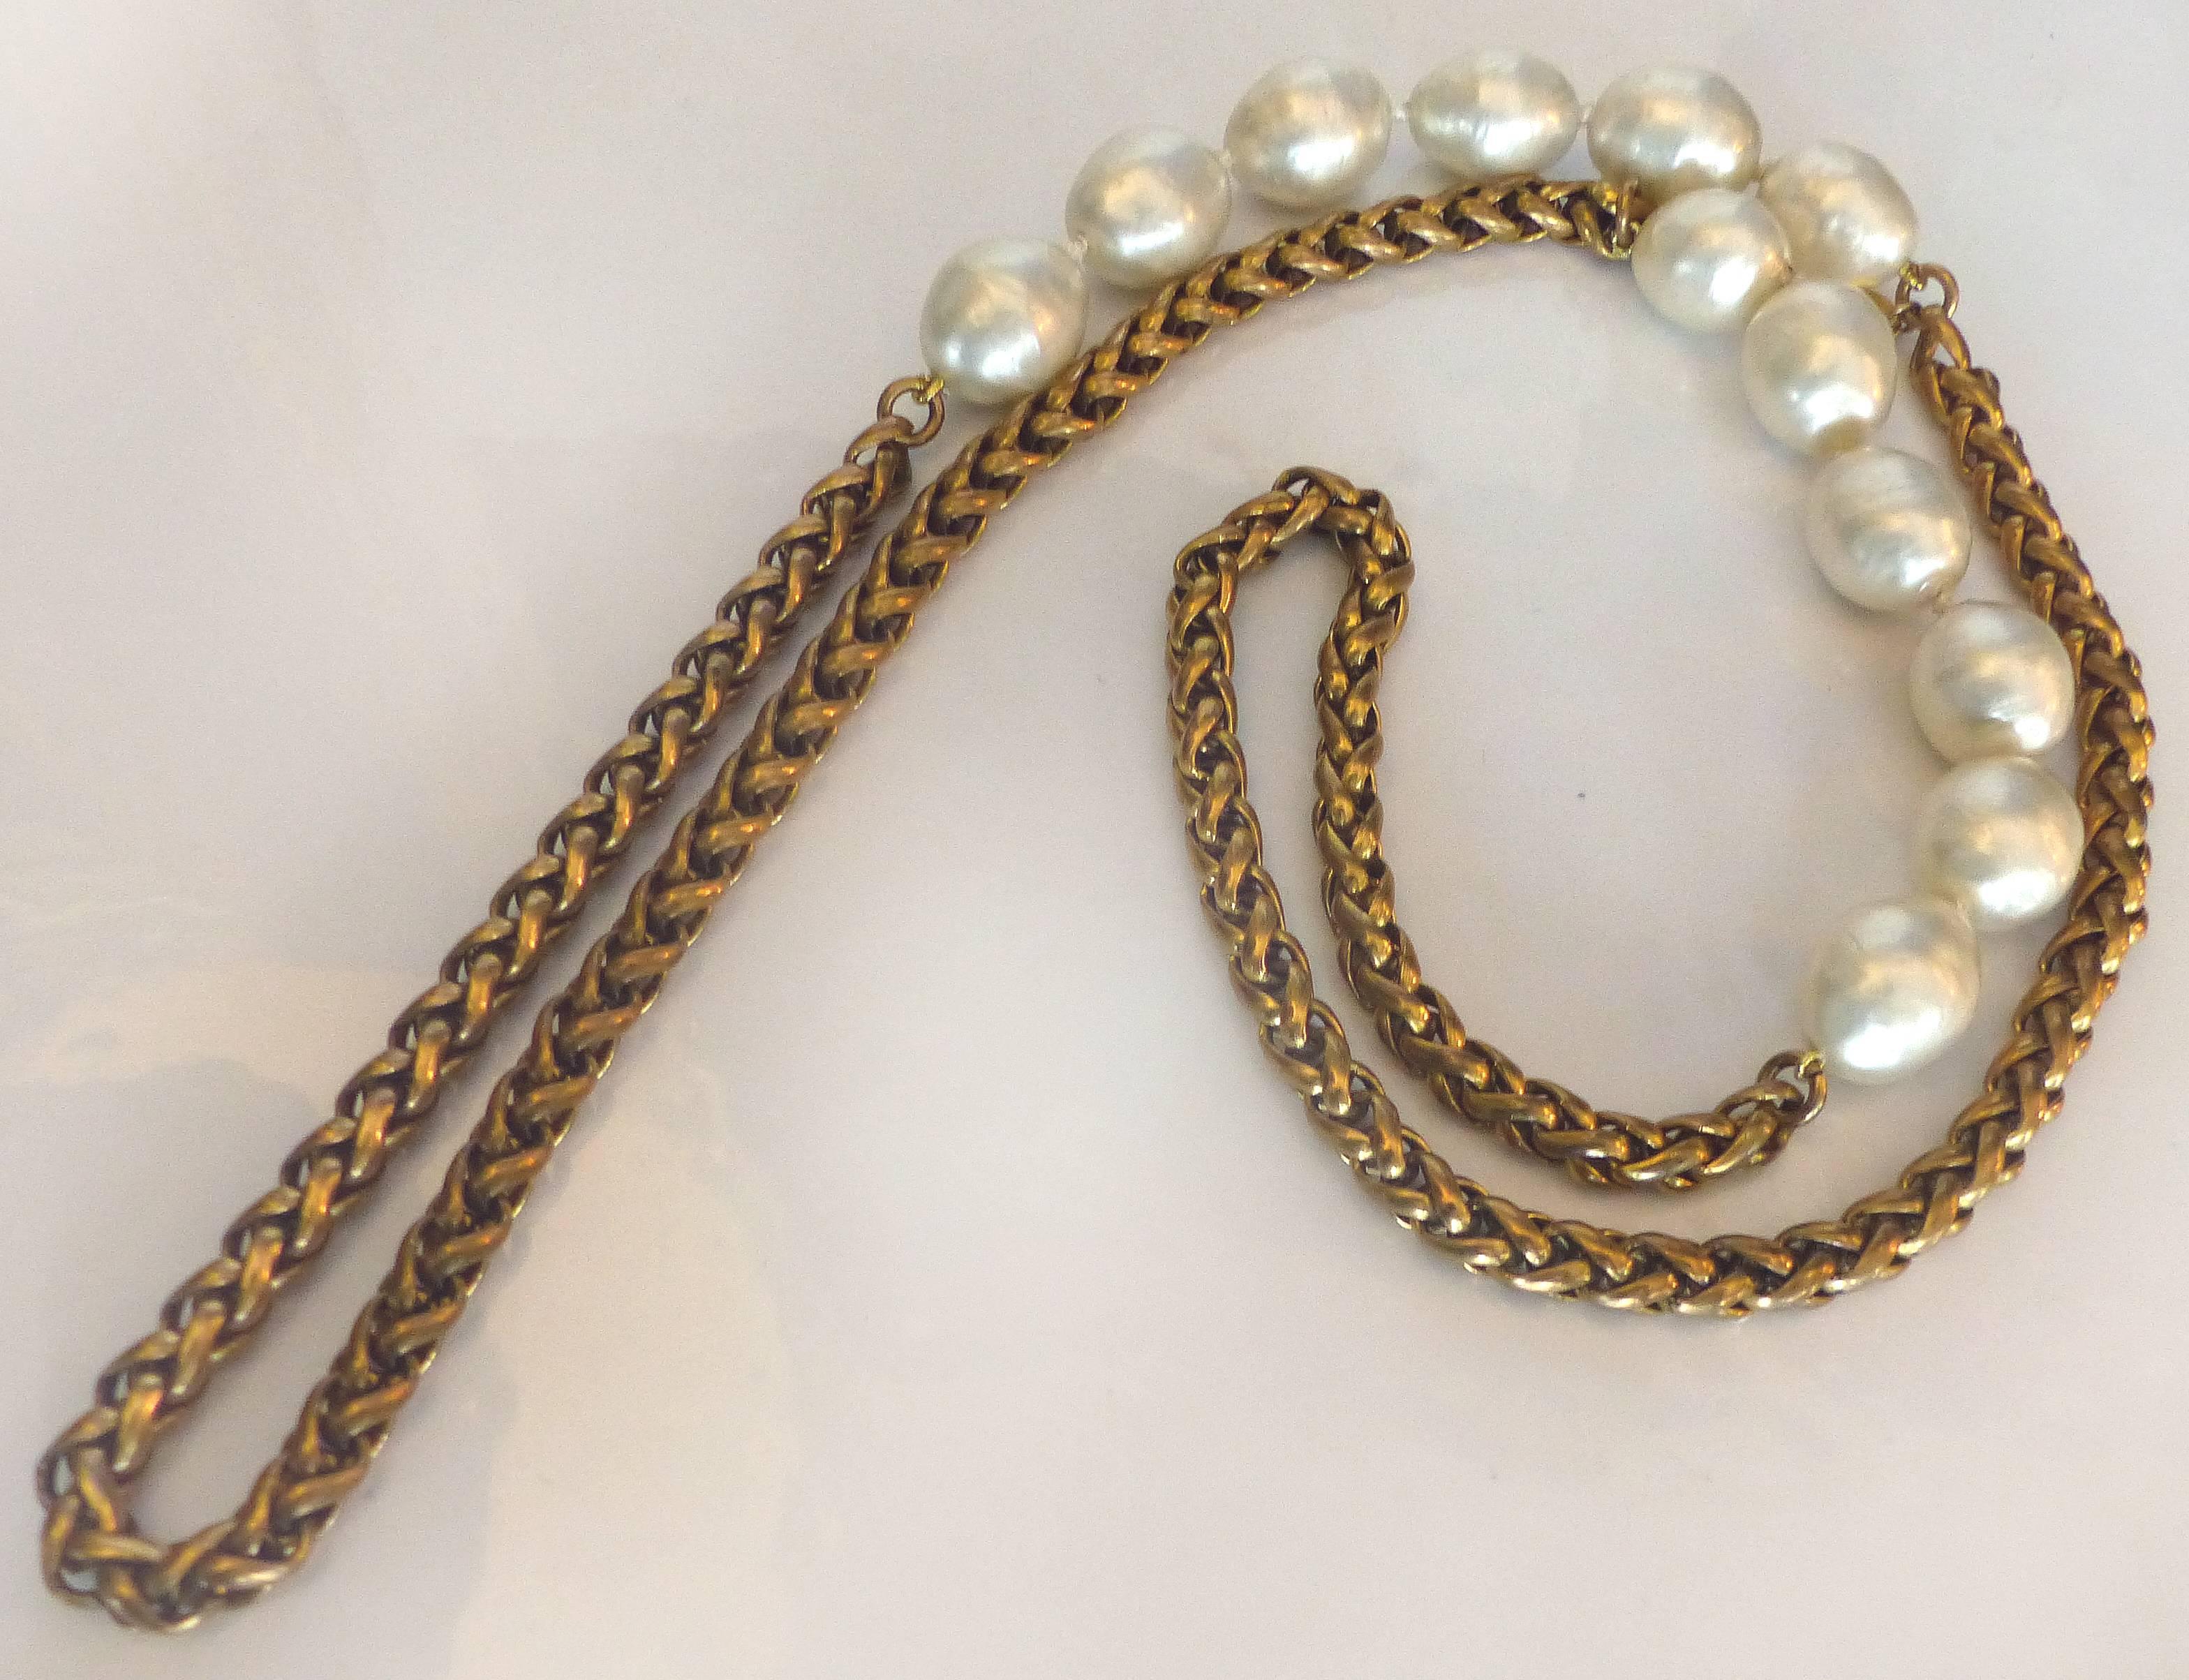 Metal Vintage Chanel Gold-Tone Necklace with Faux Pearls, 1984